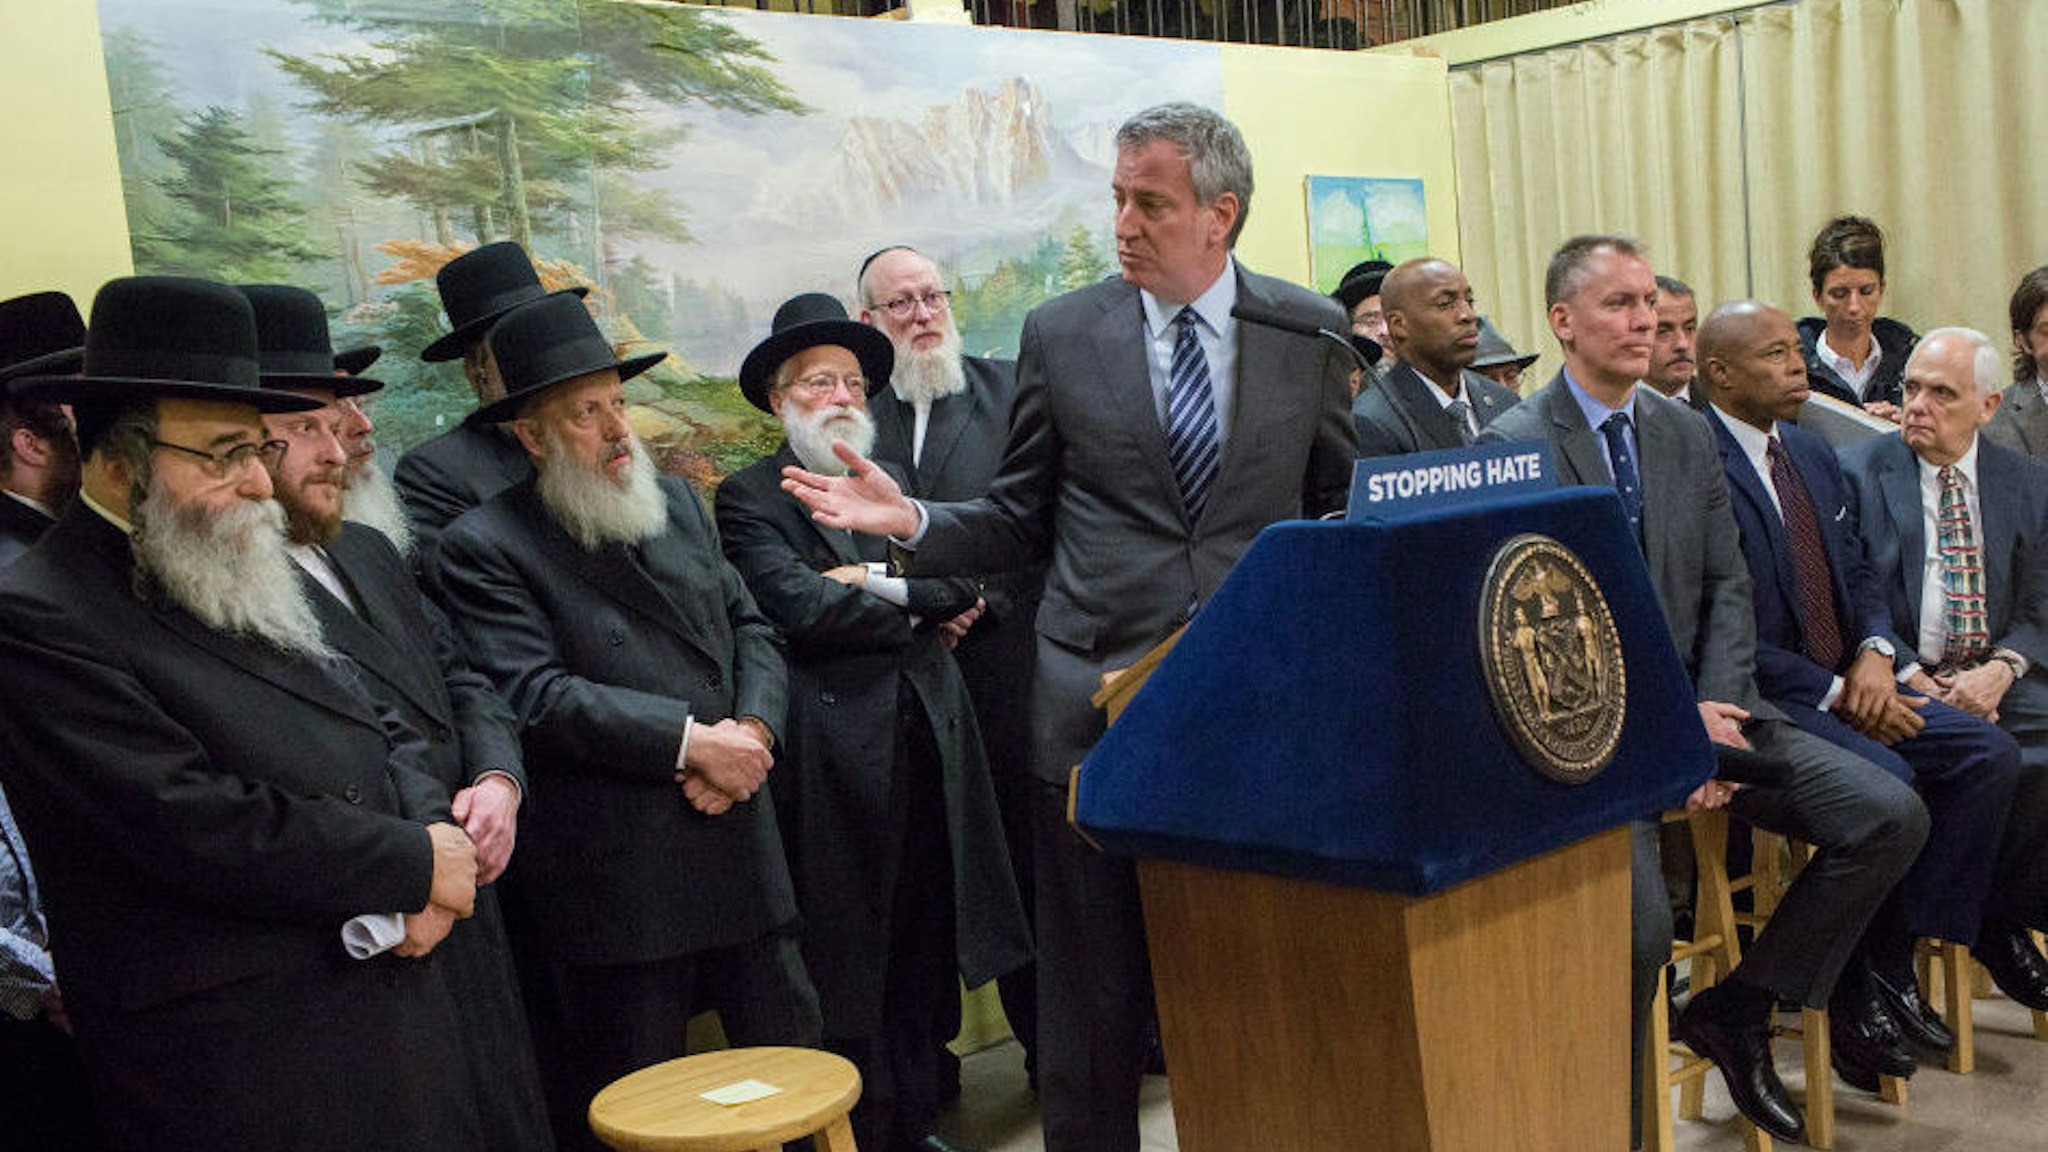 New York City Mayor Bill de Blasio, and the new New York police Commissioner Dermot Shea hold a press conference after meeting with Satmar Jewish community leaders to denounce the hate crime attack in Jersey City, December 12, 2019 in the Williamsburg neighborhood of Brooklyn, New York. (Photo by Andrew Lichtenstein/Corbis via Getty Images)